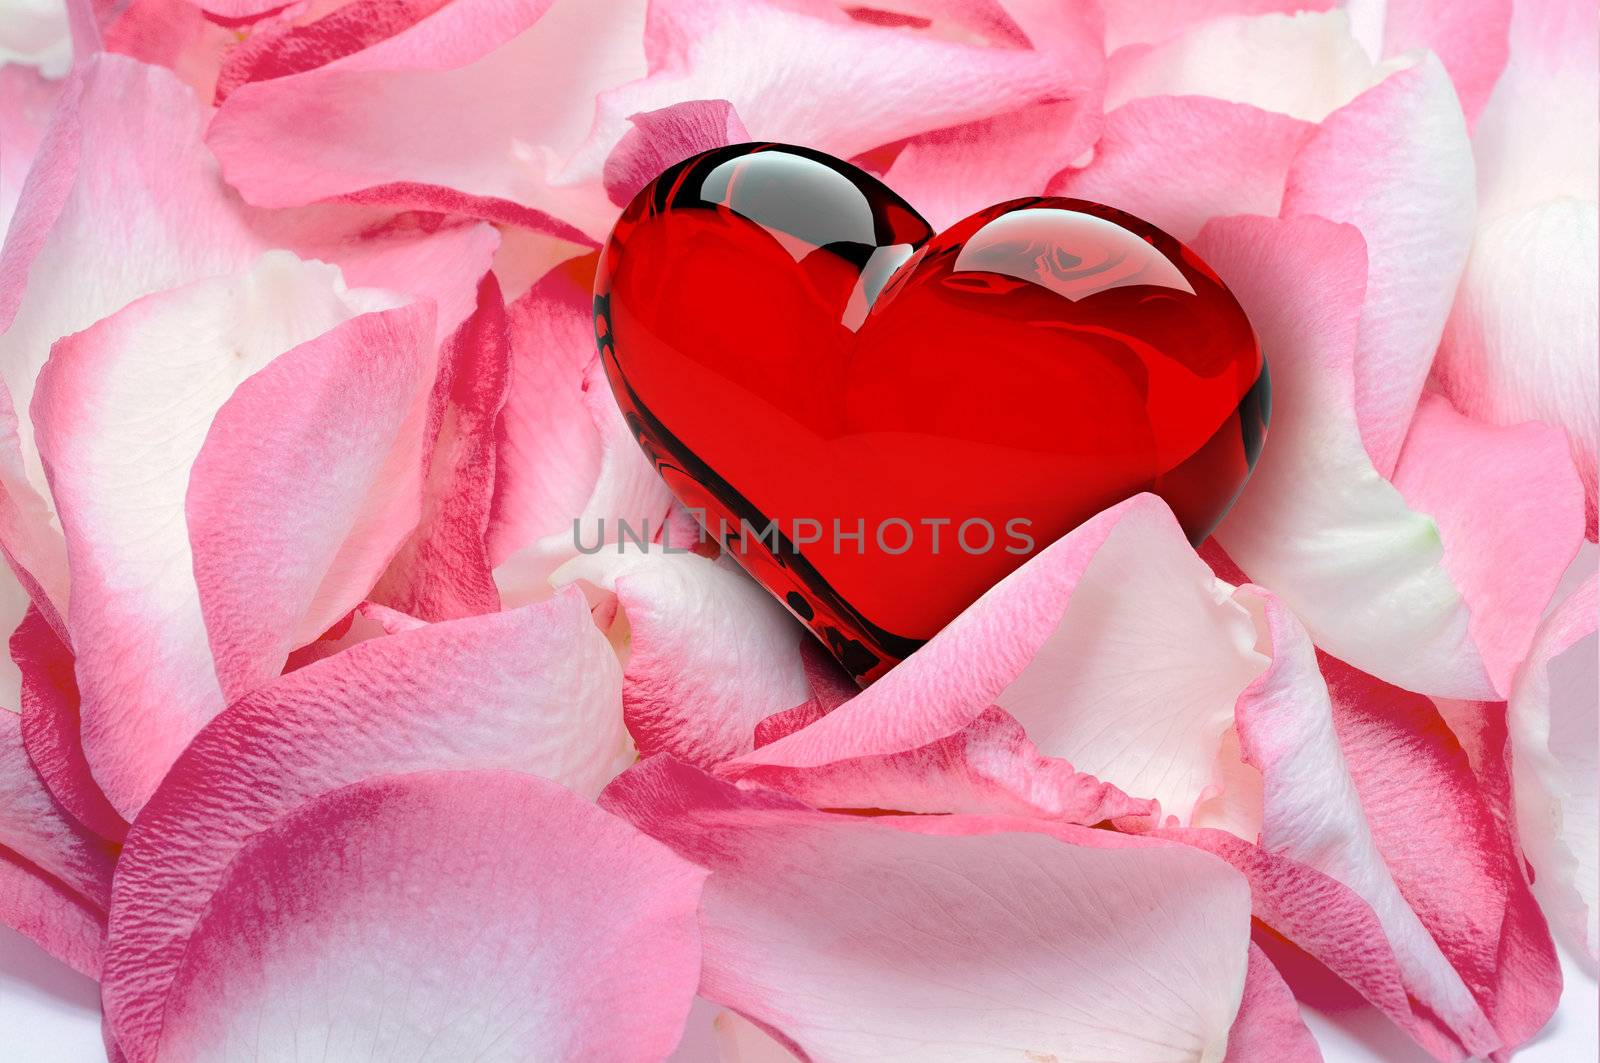 Lovely heart illustration: A red glass heart on a bed of white-pink rose petals.